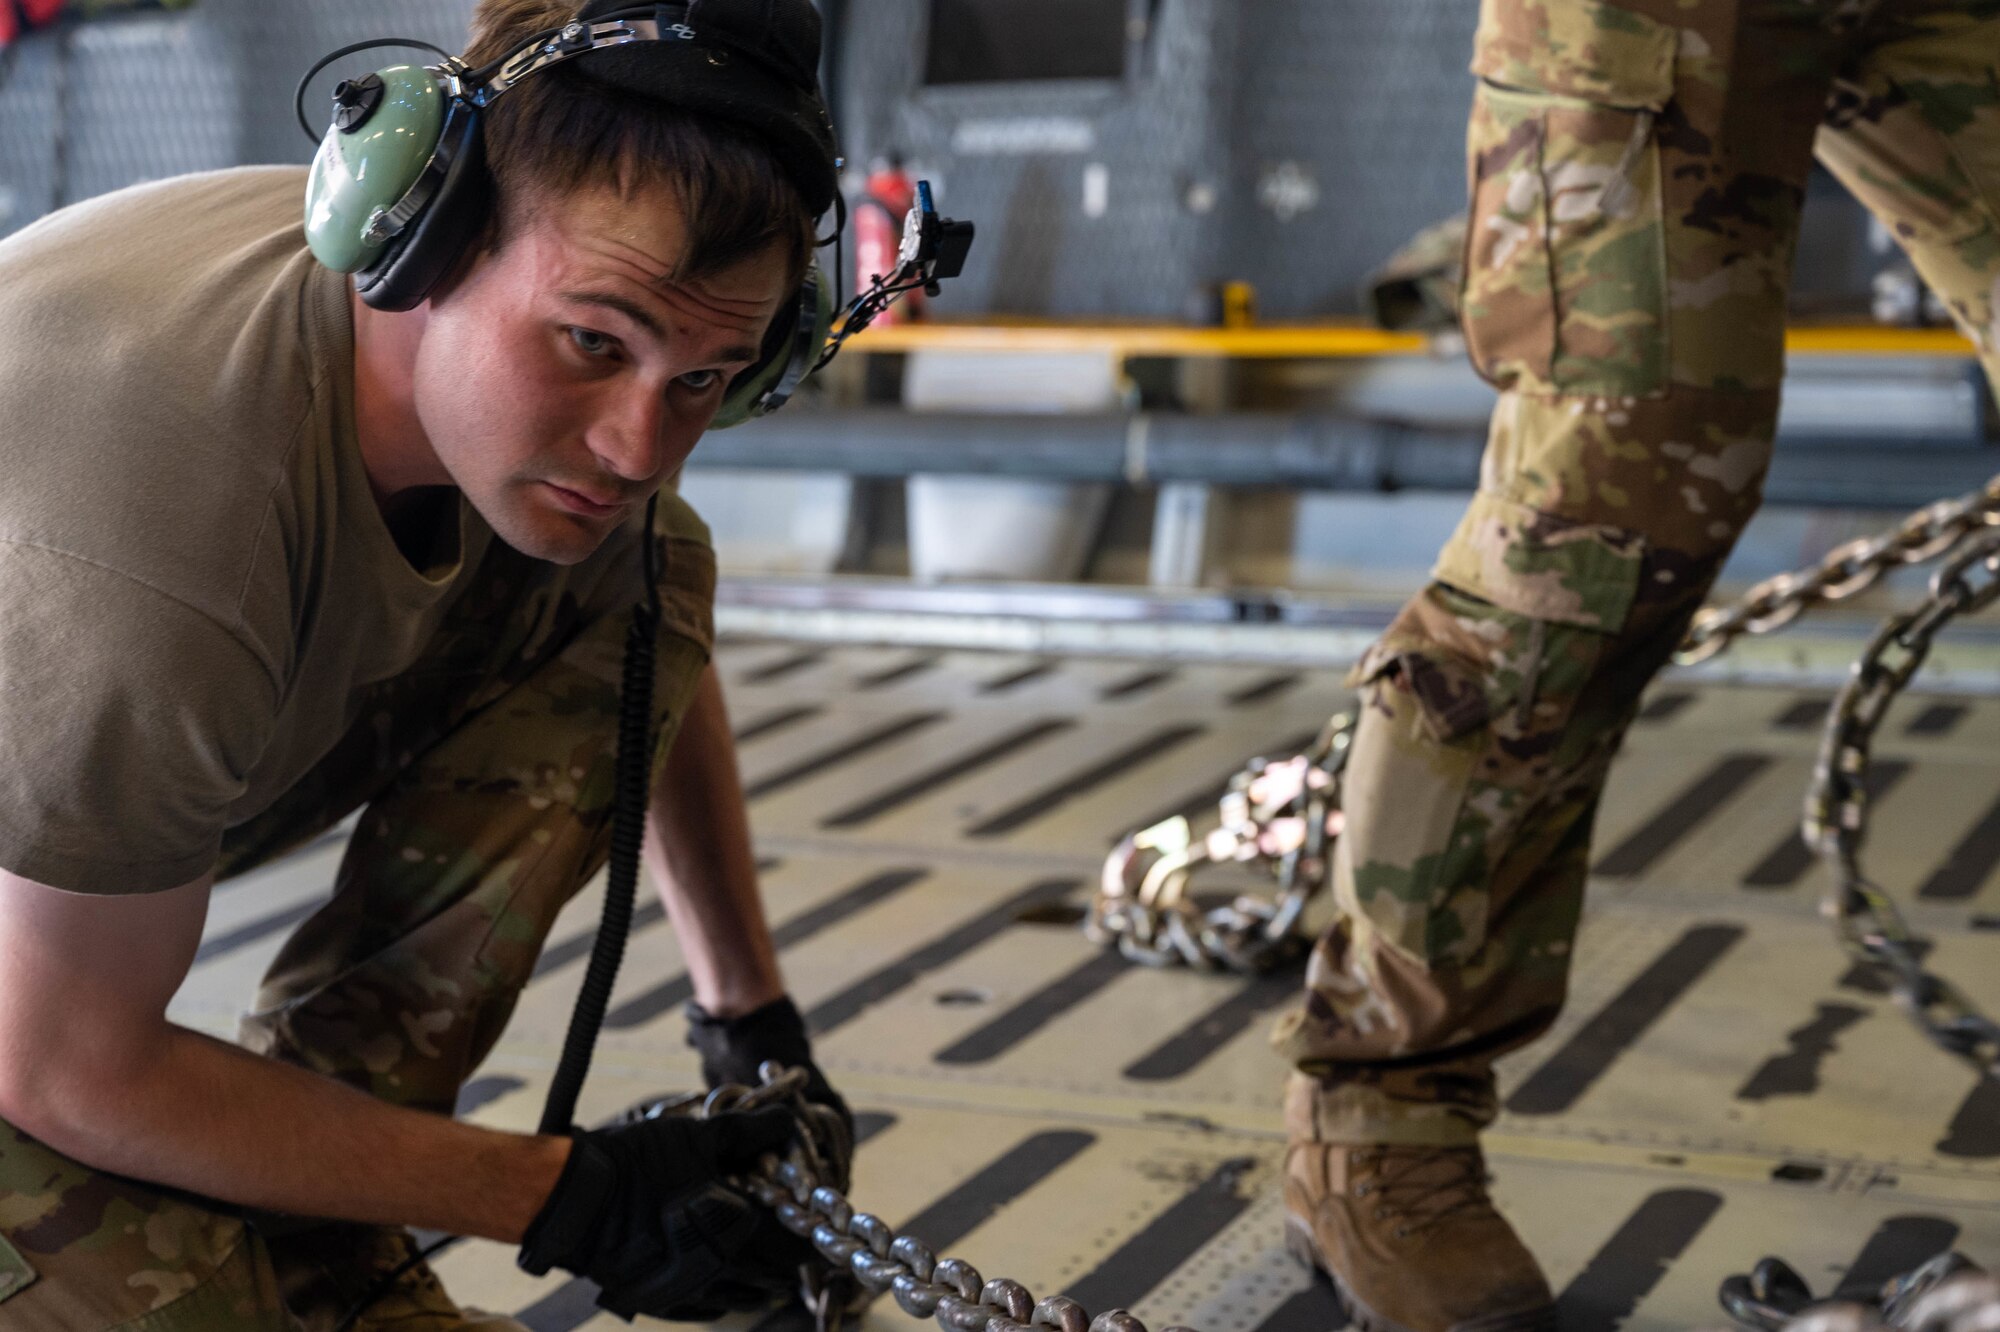 Staff Sgt. John Dittess, 9th Airlift Squadron loadmaster, chains a K-loader to the cargo compartment of a Dover Air Force Base C-5M Super Galaxy during a Major Command Service Tail Trainer at Holloman AFB, June 9, 2021. Loadmasters from the 9th AS coordinated cargo with Airmen from Air Education and Training Command’s 49th Wing and Air Force Materiel Command’s 635th Materiel Maintenance Group to complete the 10-day MSTT. Over the course of the training, Airmen loaded and unloaded 320,085 pounds of cargo, including palletized cargo, aircraft ground equipment, a fuel truck and a K-loader. (U.S. Air Force photo by Senior Airman Faith Schaefer)